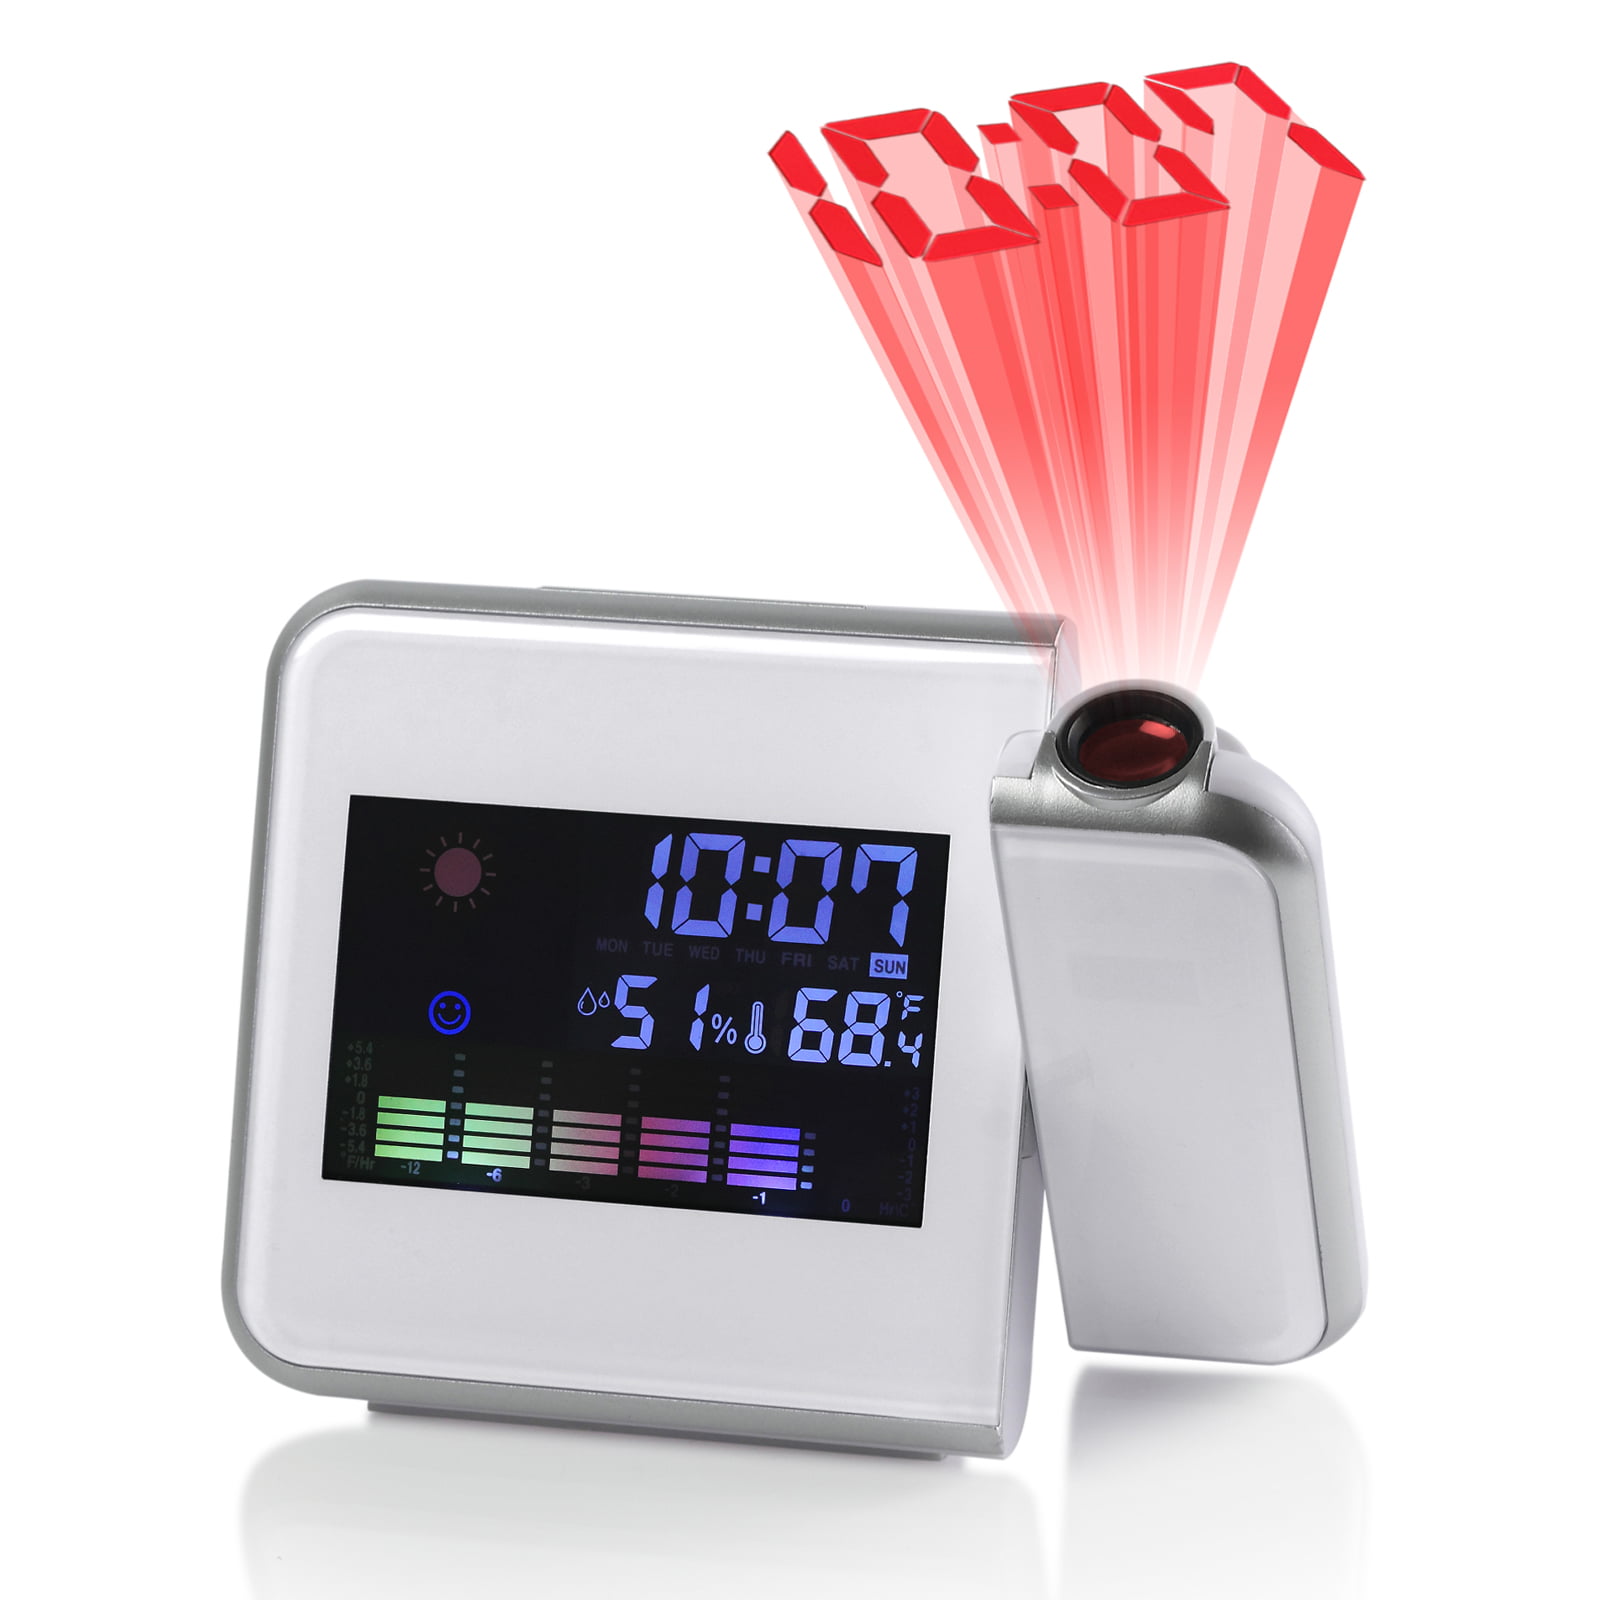 ESYNIC Digital LED backlit and LCD screen Snooze Time Projector Alarm Clock Weather Station Calendar Projection with power cable - Walmart.com